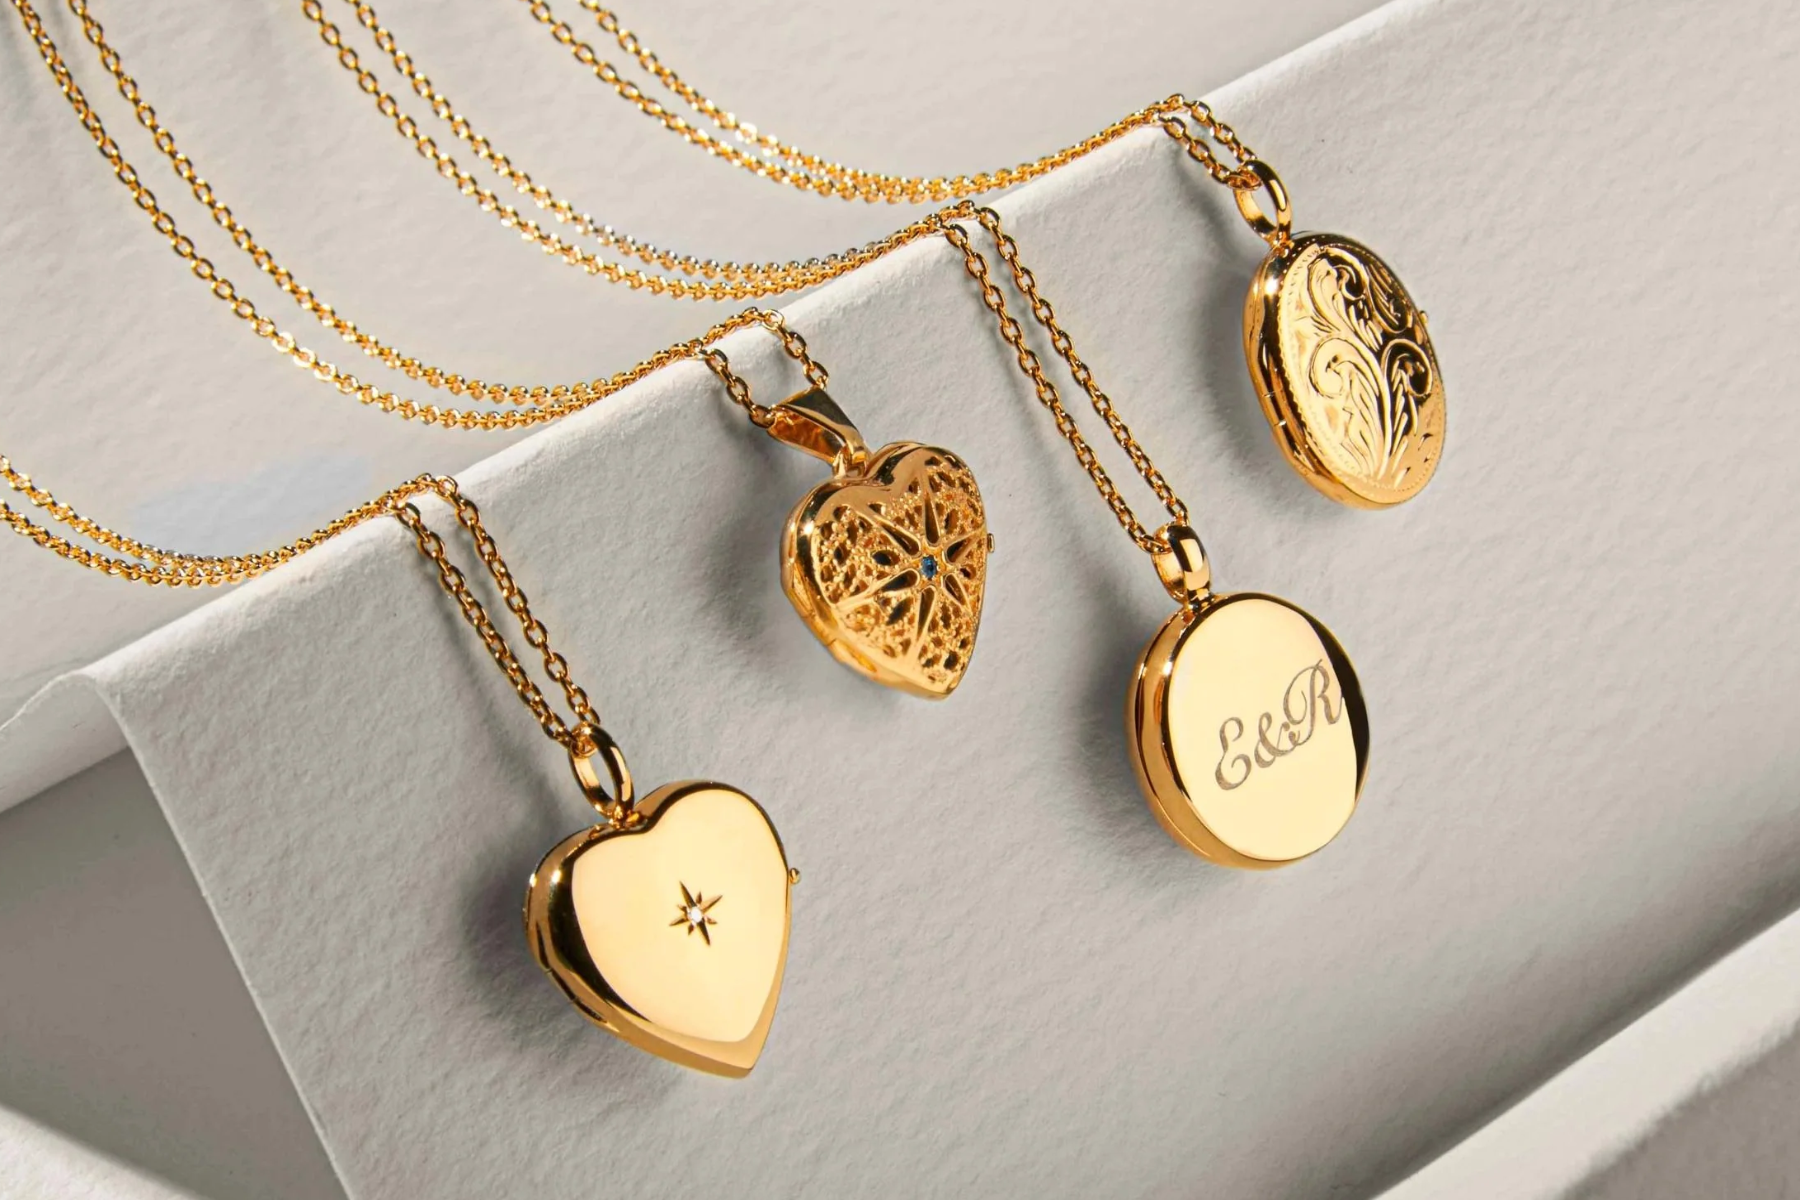 Four lockets made of gold